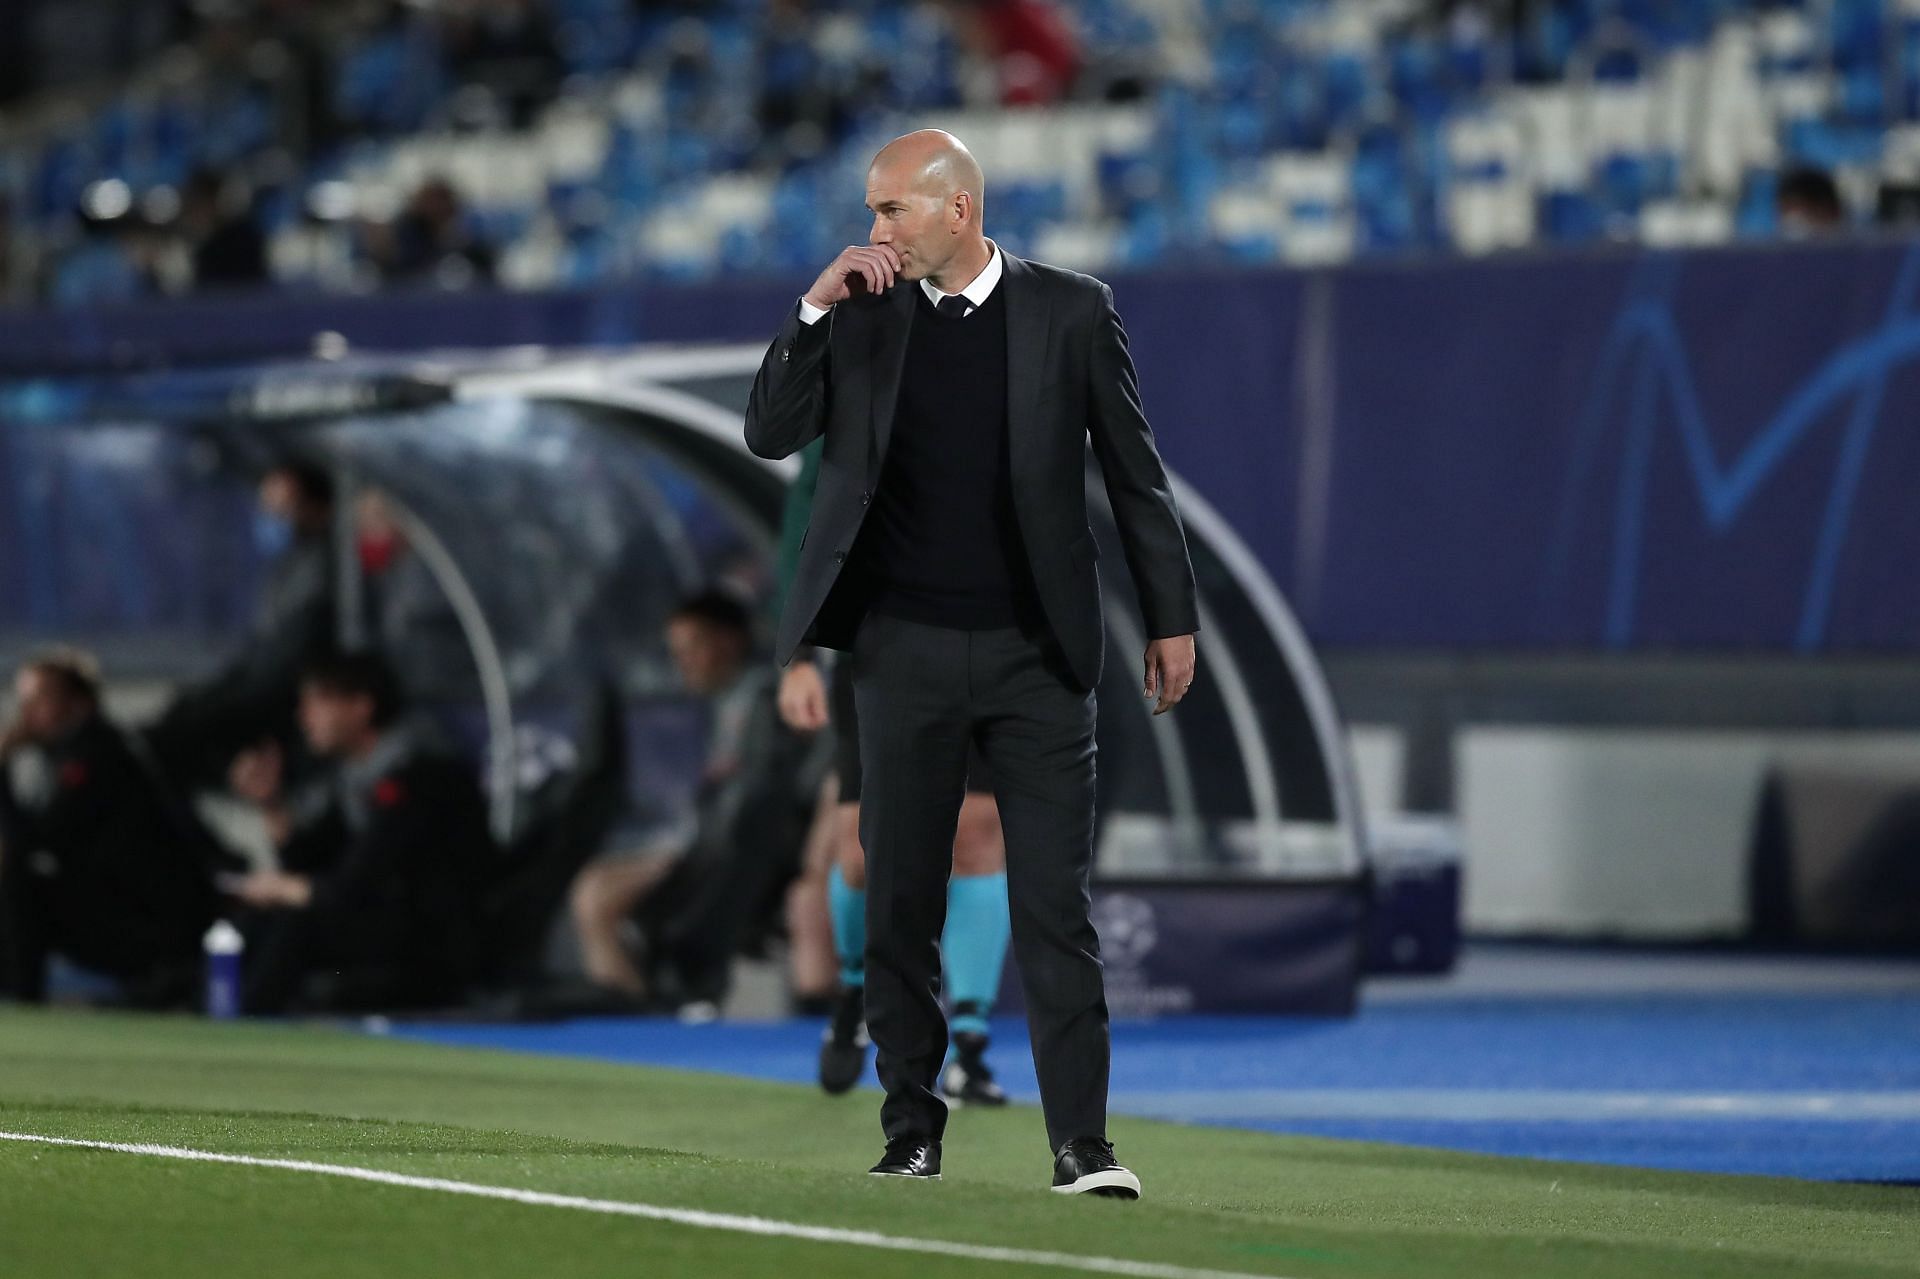 Jerome Rothen has urged the Parisians to appoint Zinedine Zidane as their next manager.